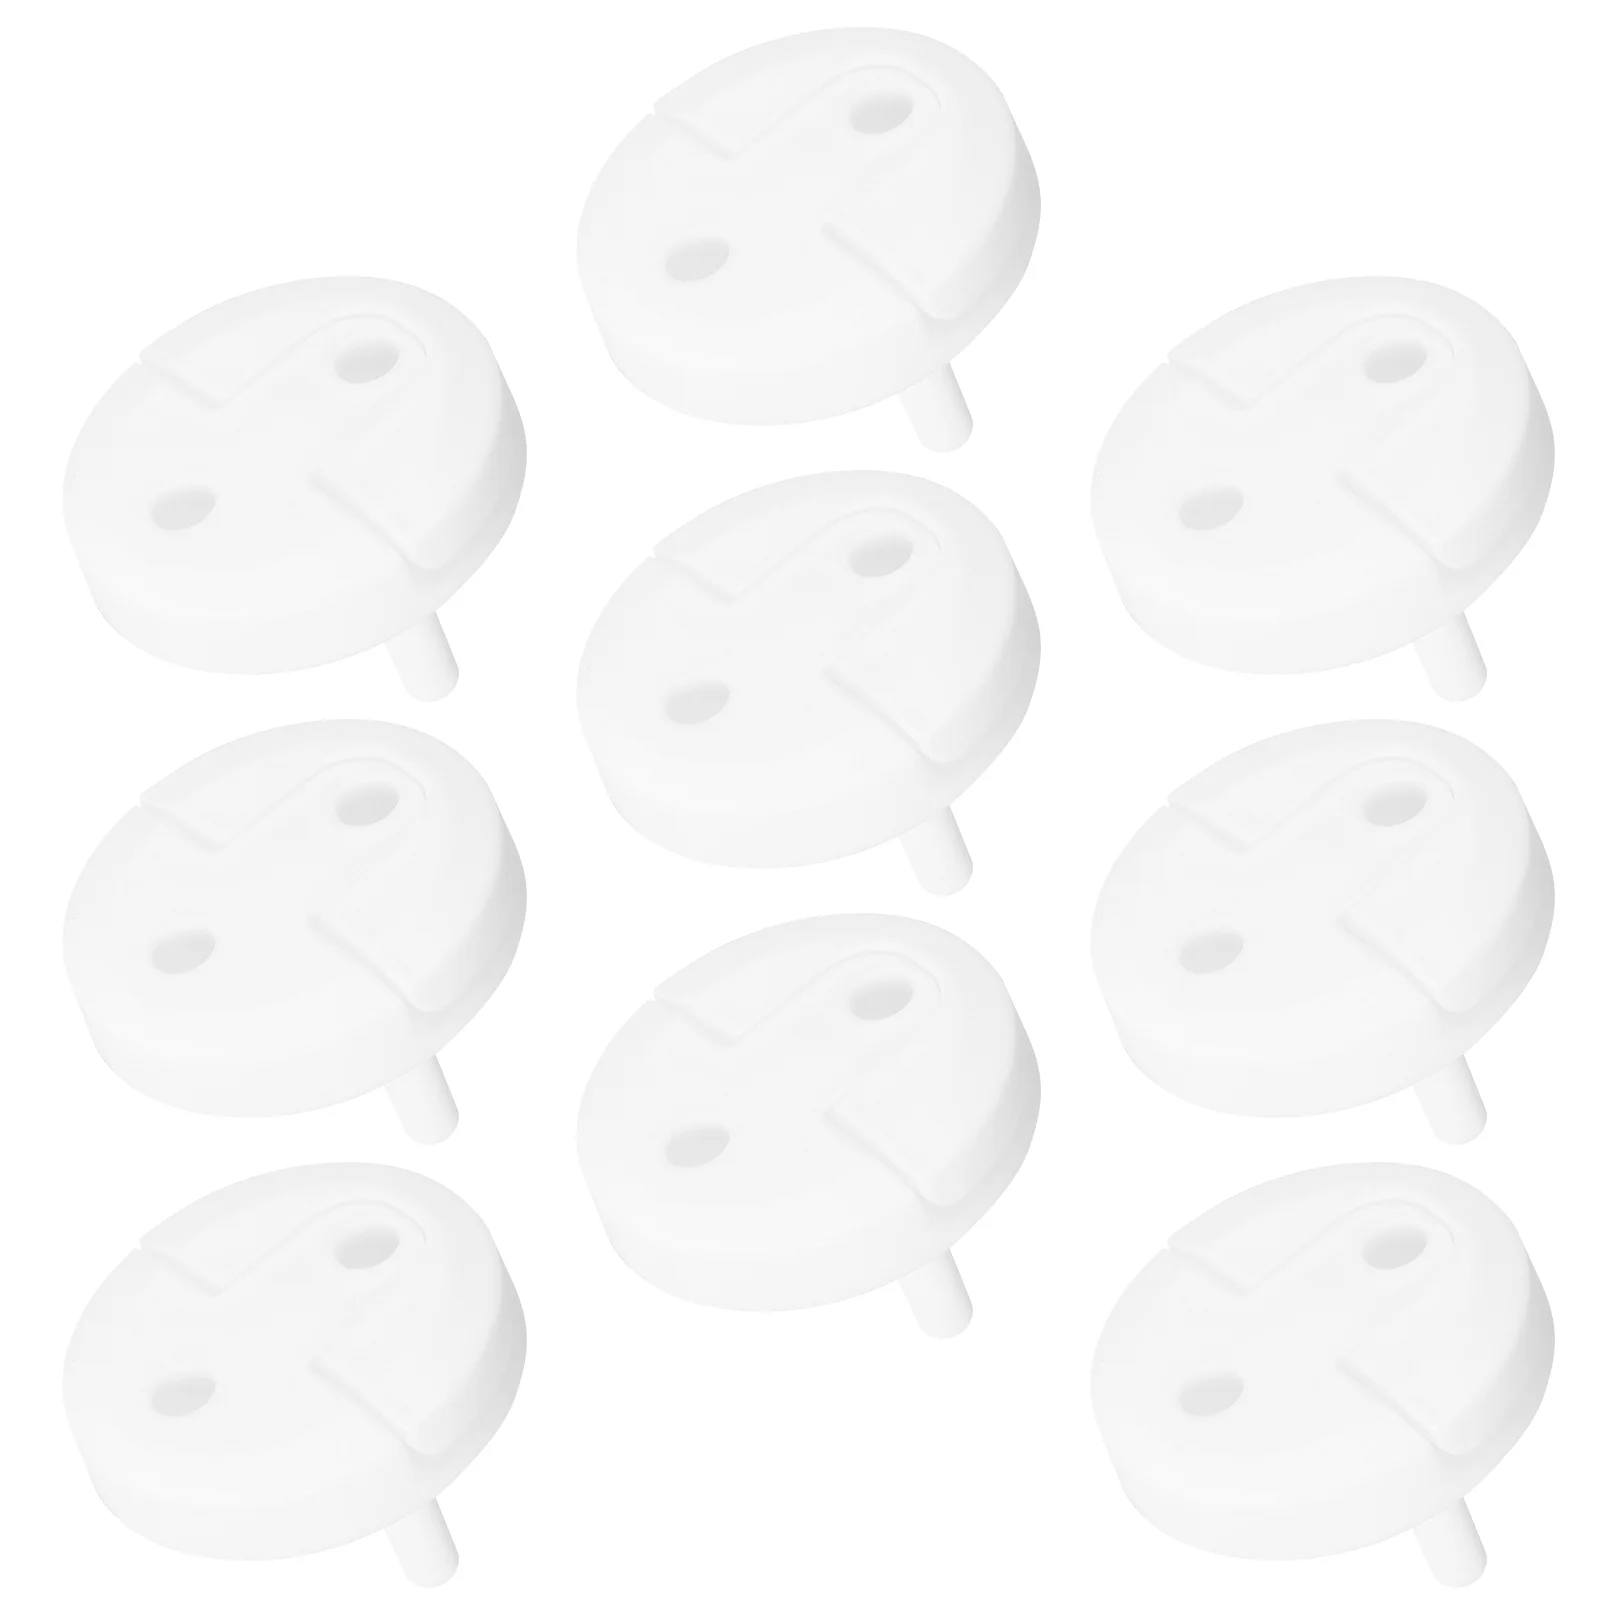 

10 Pcs Socket Protection Cover Home Secutiry Plastic Plugs Covers Child Proof Outlet Segue Electrical Power Outlets